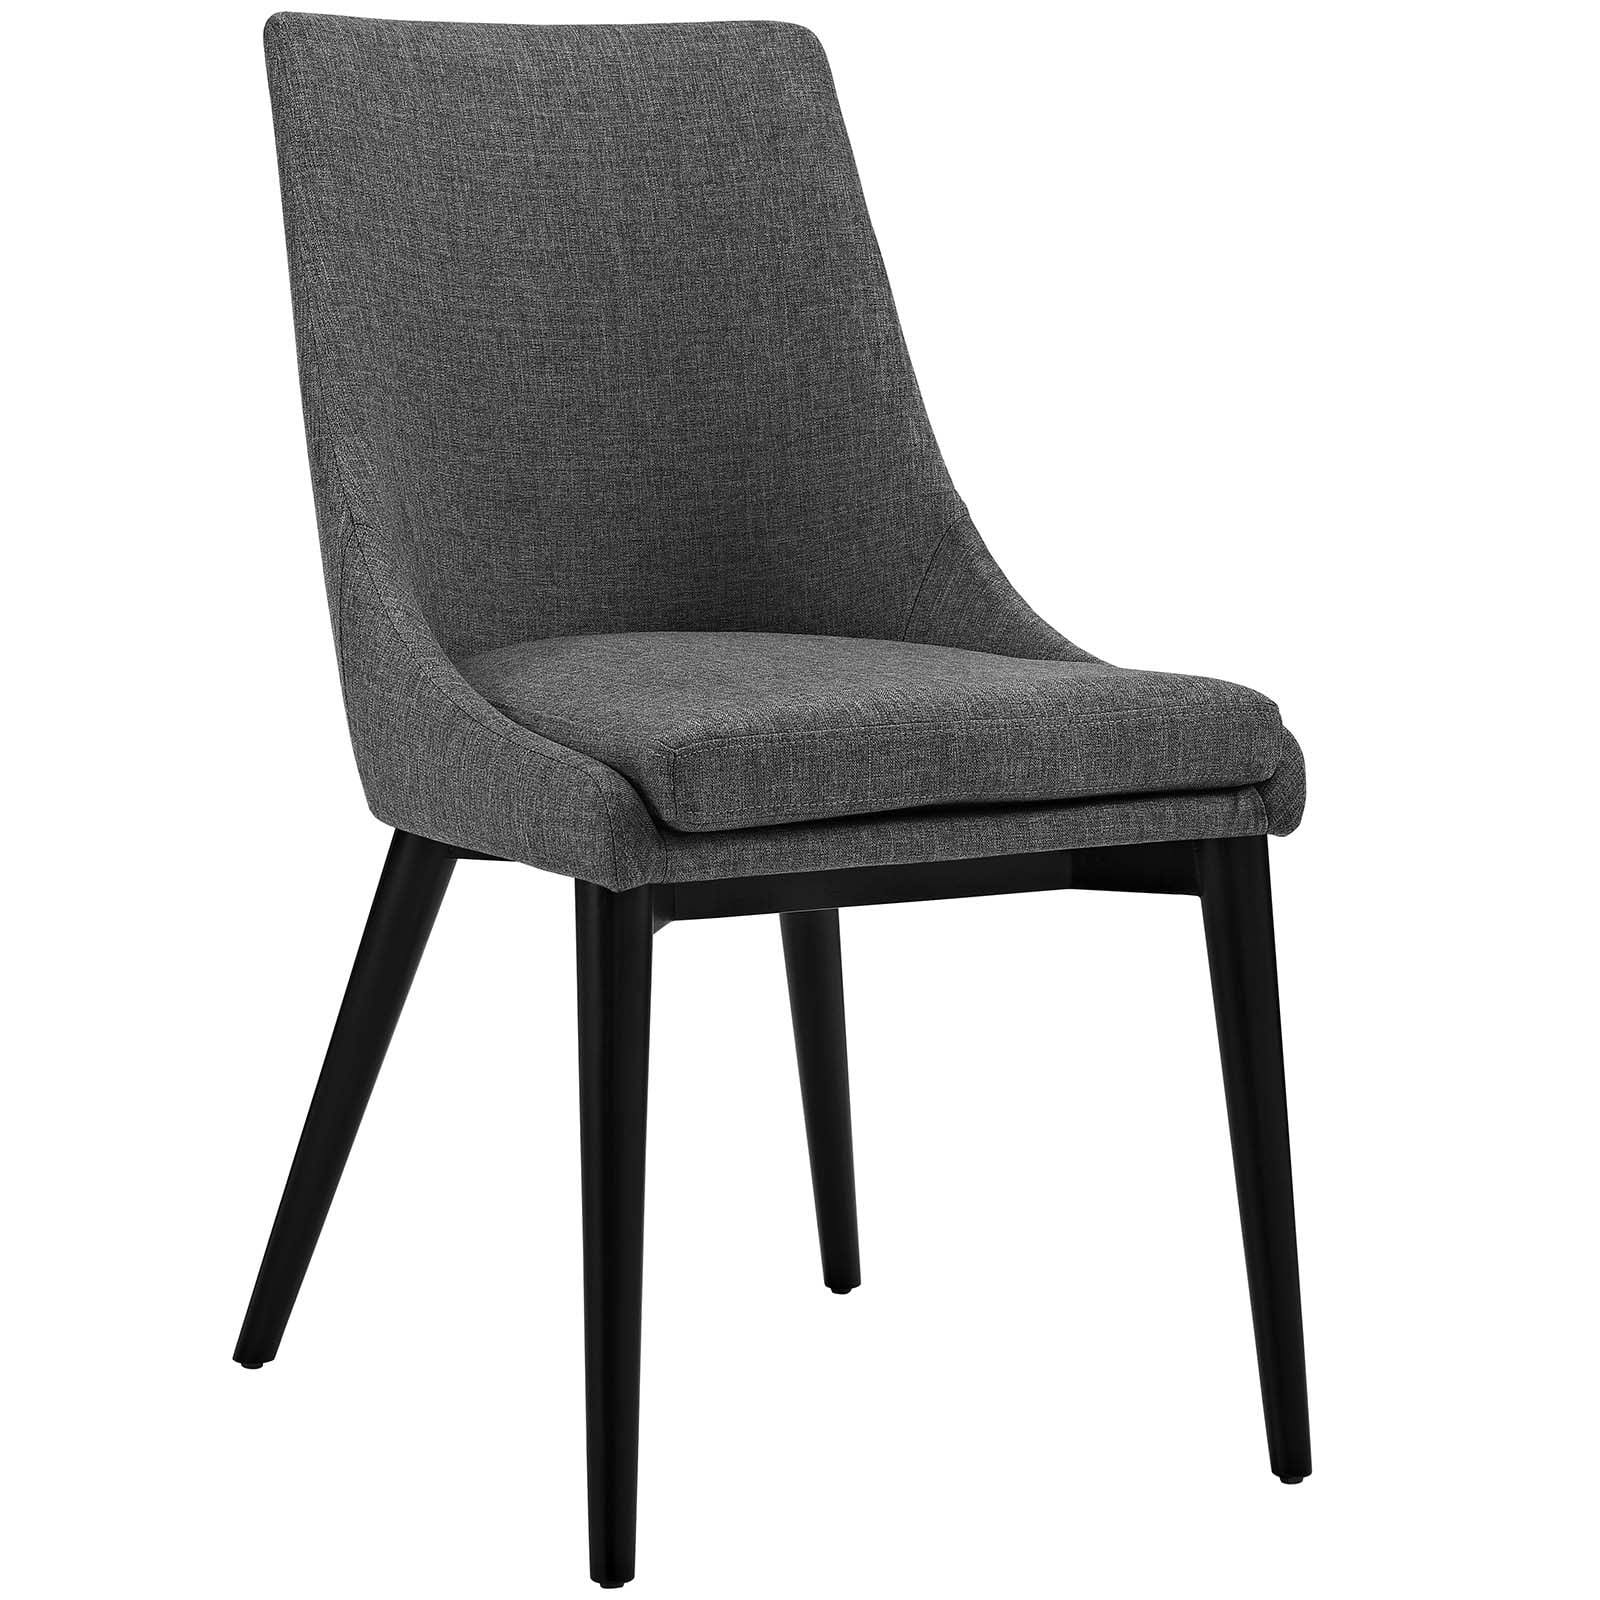 Sleek Gray Rubberwood Upholstered Side Chair with Foam Padding